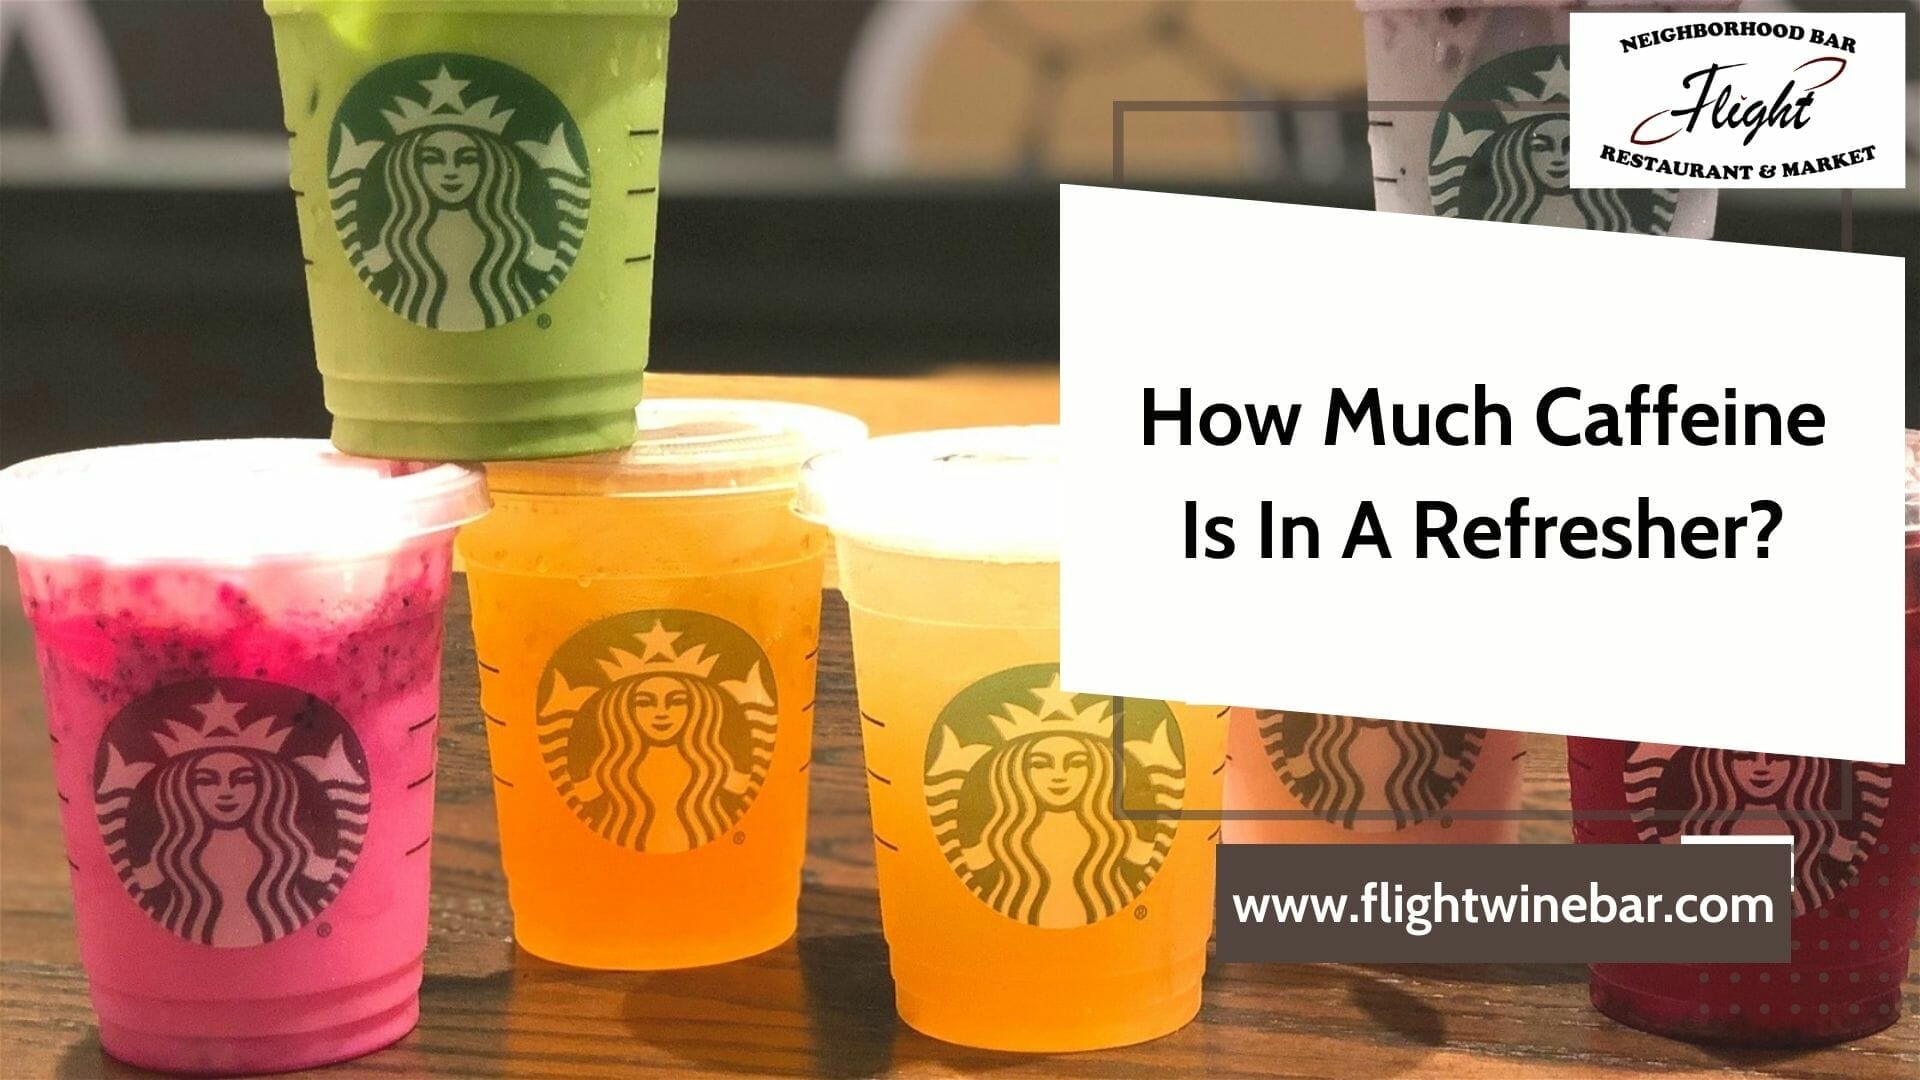 How Much Caffeine Is In A Refresher